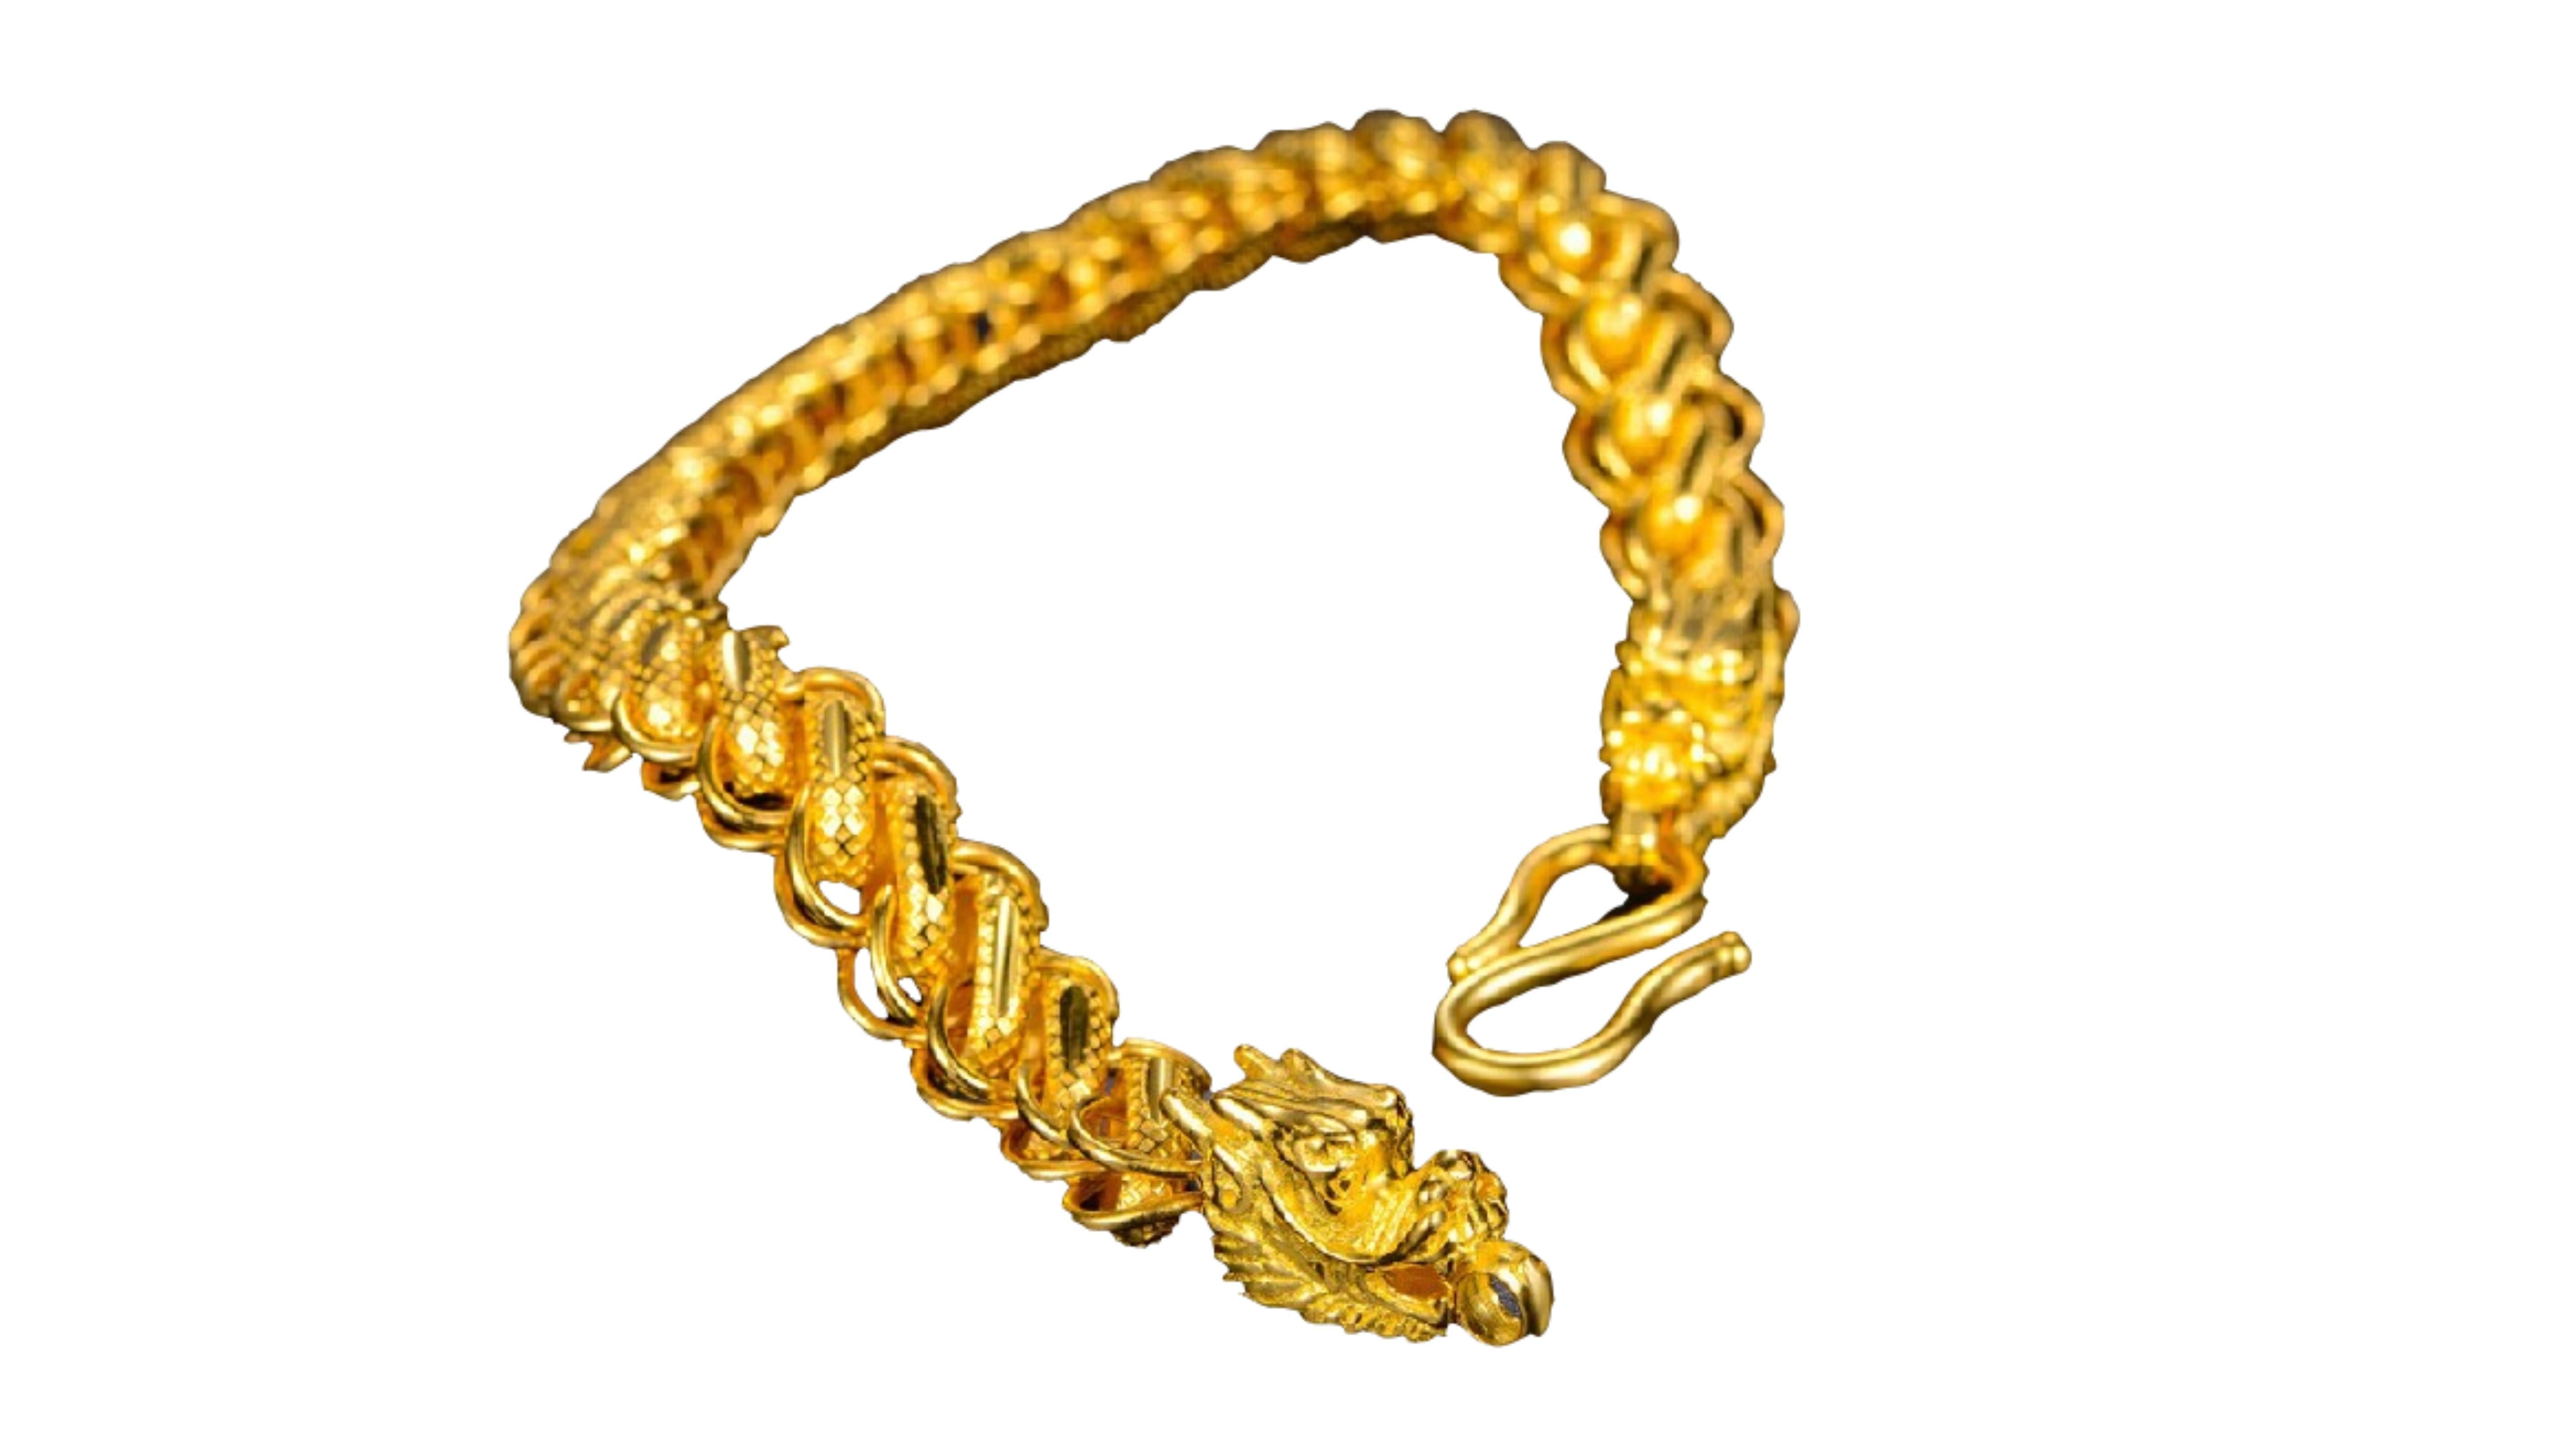 Thailand Dragon Mens Bracelets24 Karat Yellow Gold  

This is a Thailand Dragon Mens Bracelet set in 24k Yellow Gold stands out and adds to our collection for dragon jewellery such as rings.   
   
The meaning  for Dragons in Thailand, similar to